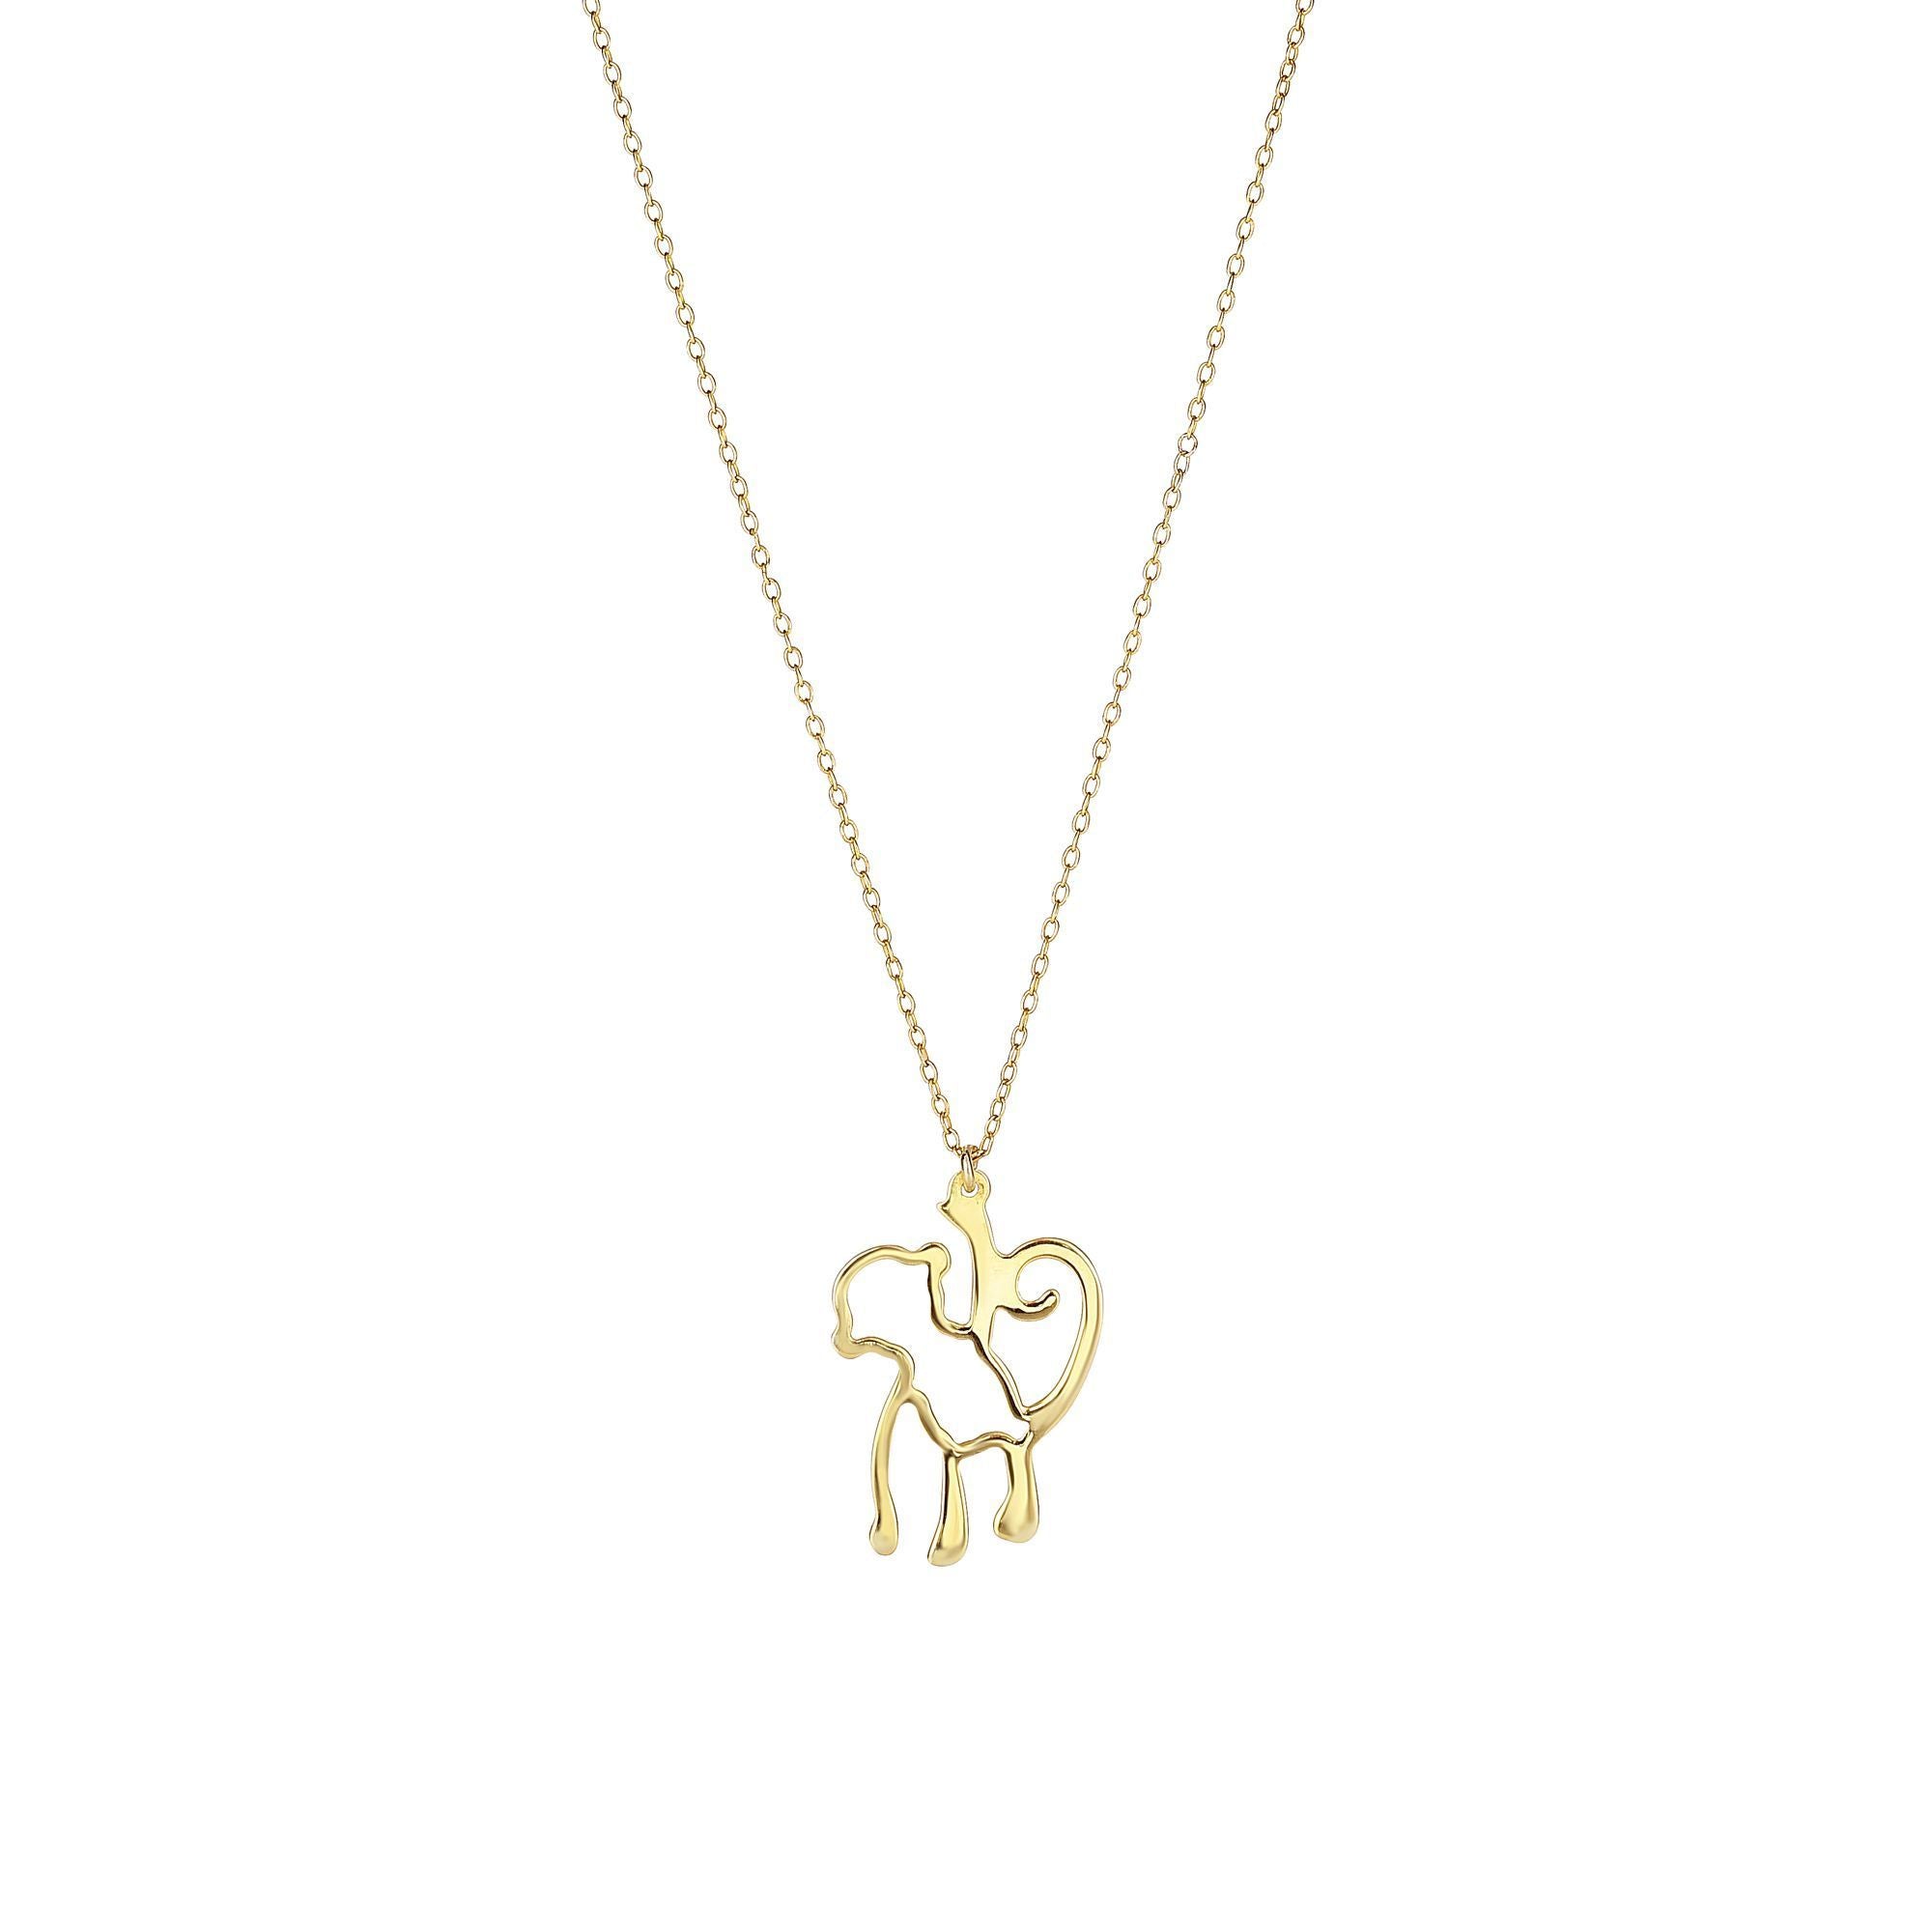 Dainty Minimalist Solid Gold Monkey Hanging Charm Necklace - wingroupjewelry